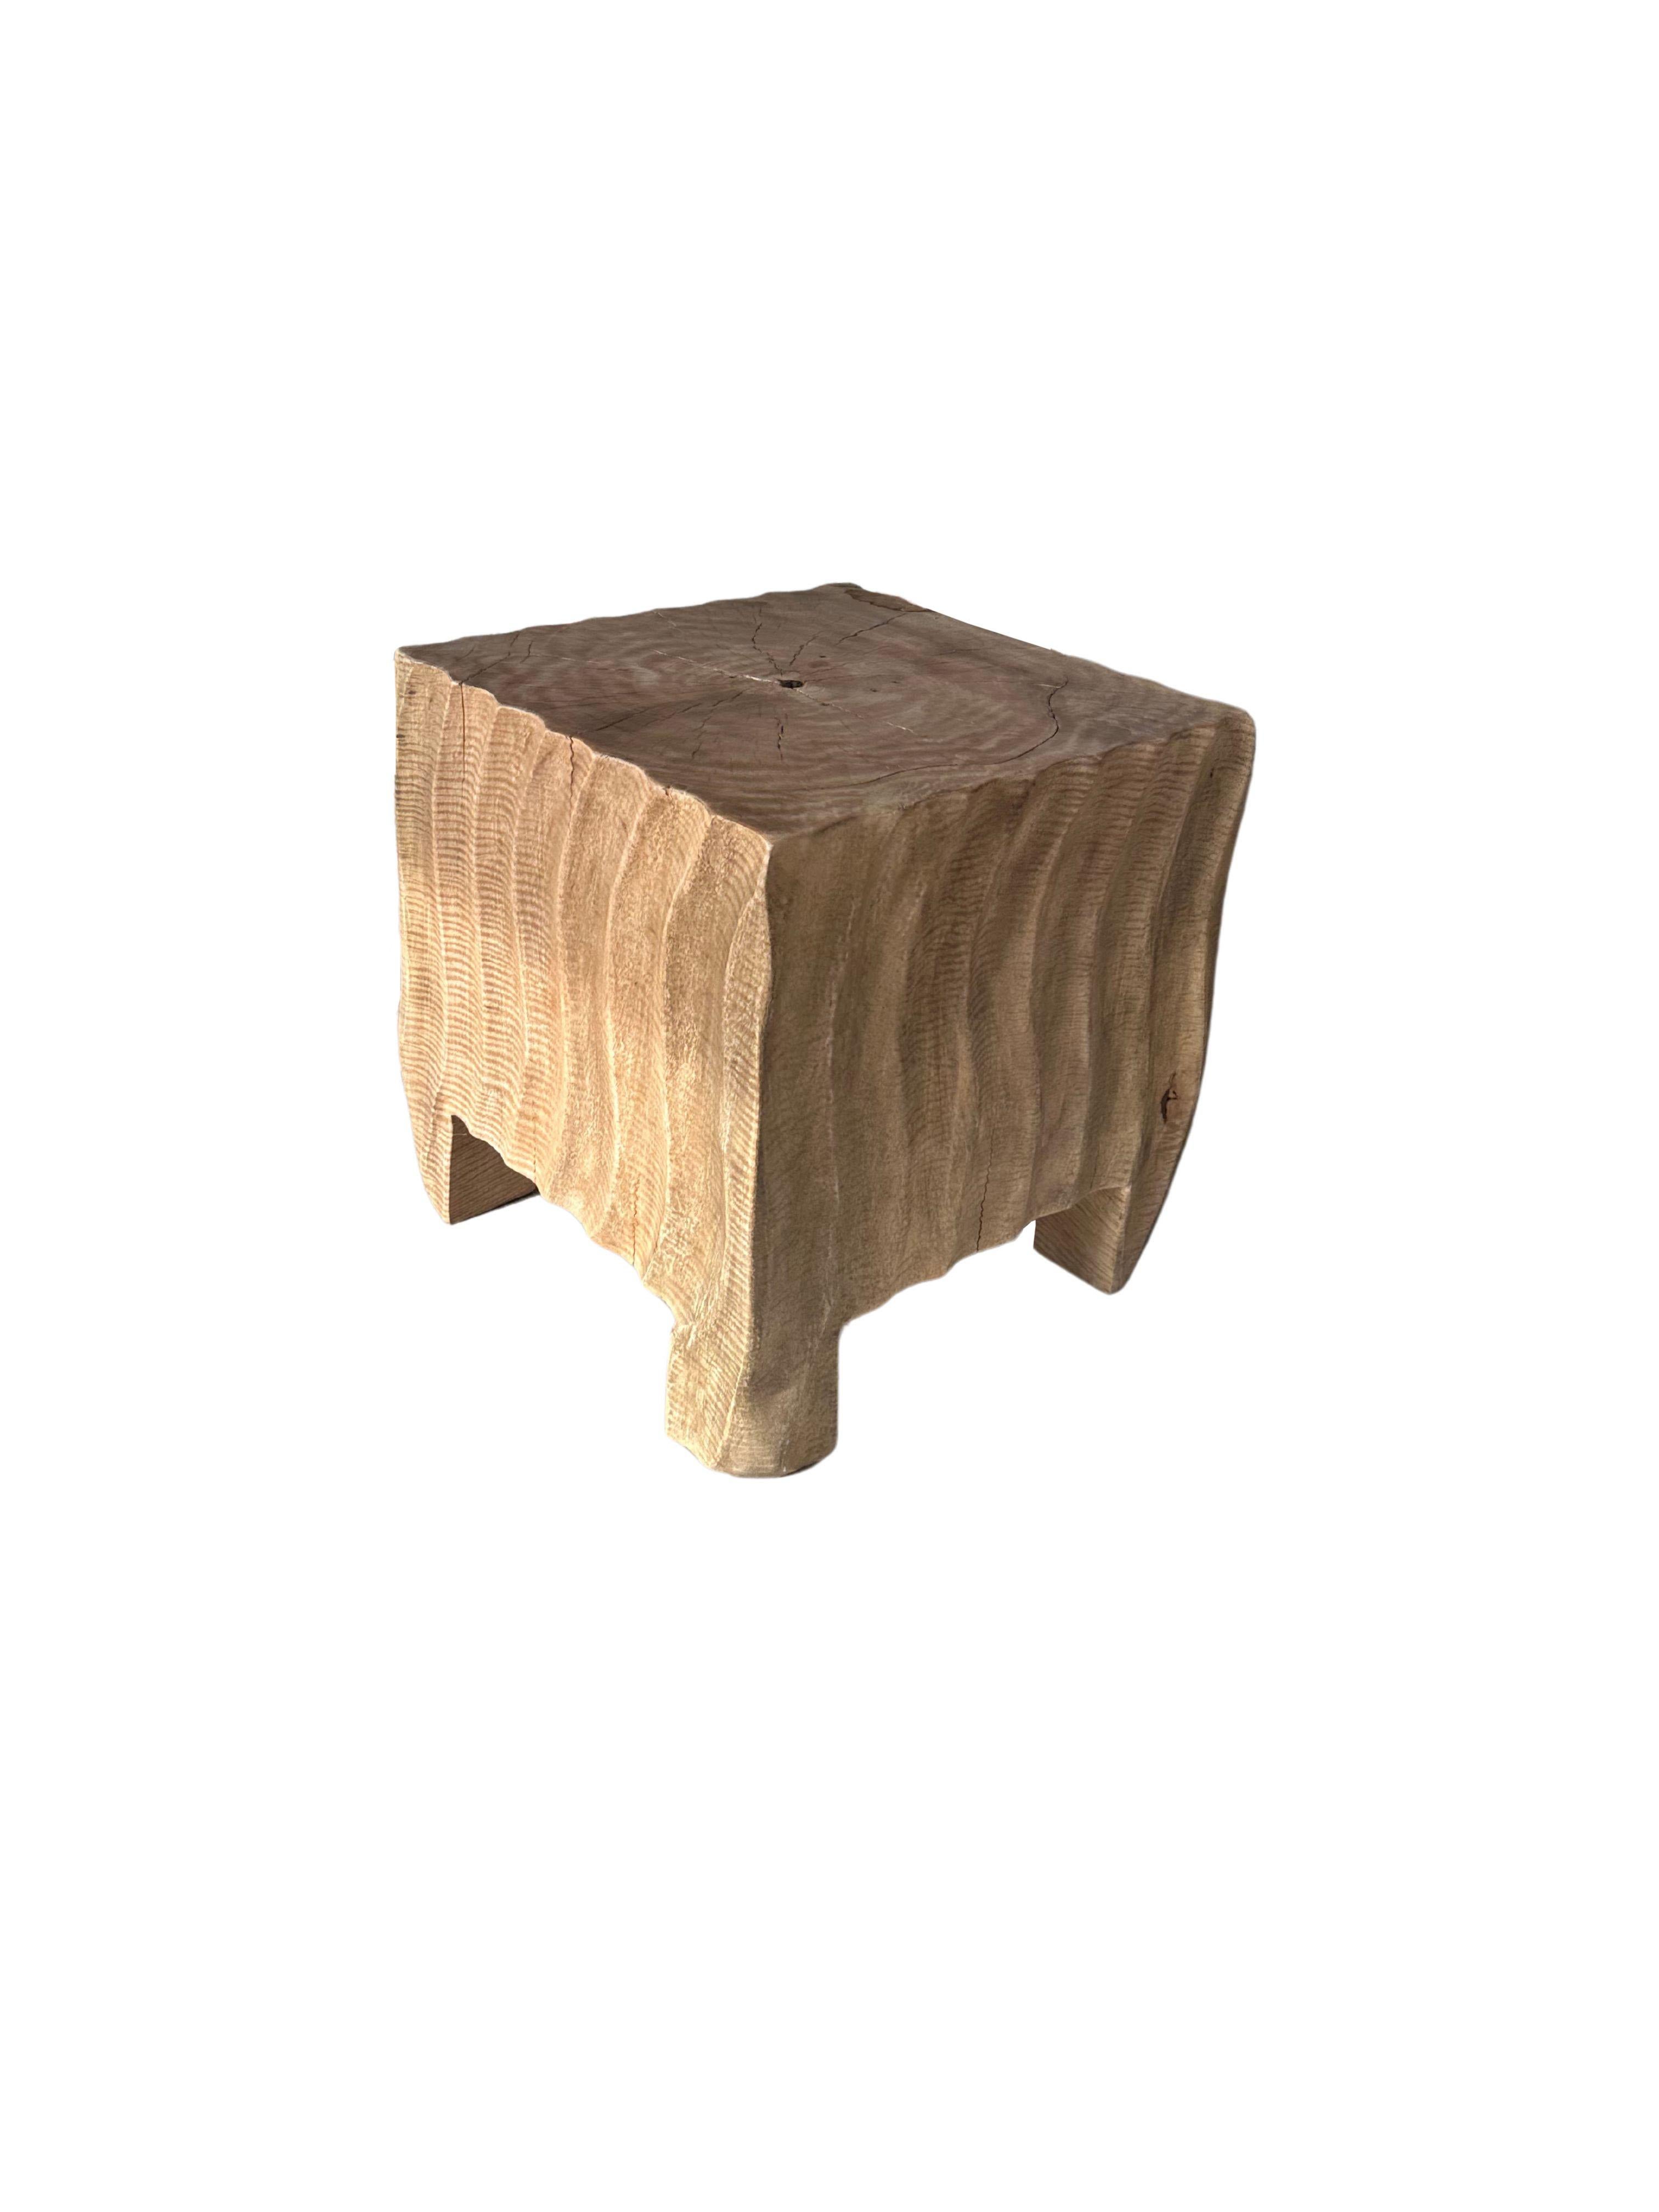 Sculptural Side Table Mango Wood Natural Finish In New Condition For Sale In Jimbaran, Bali